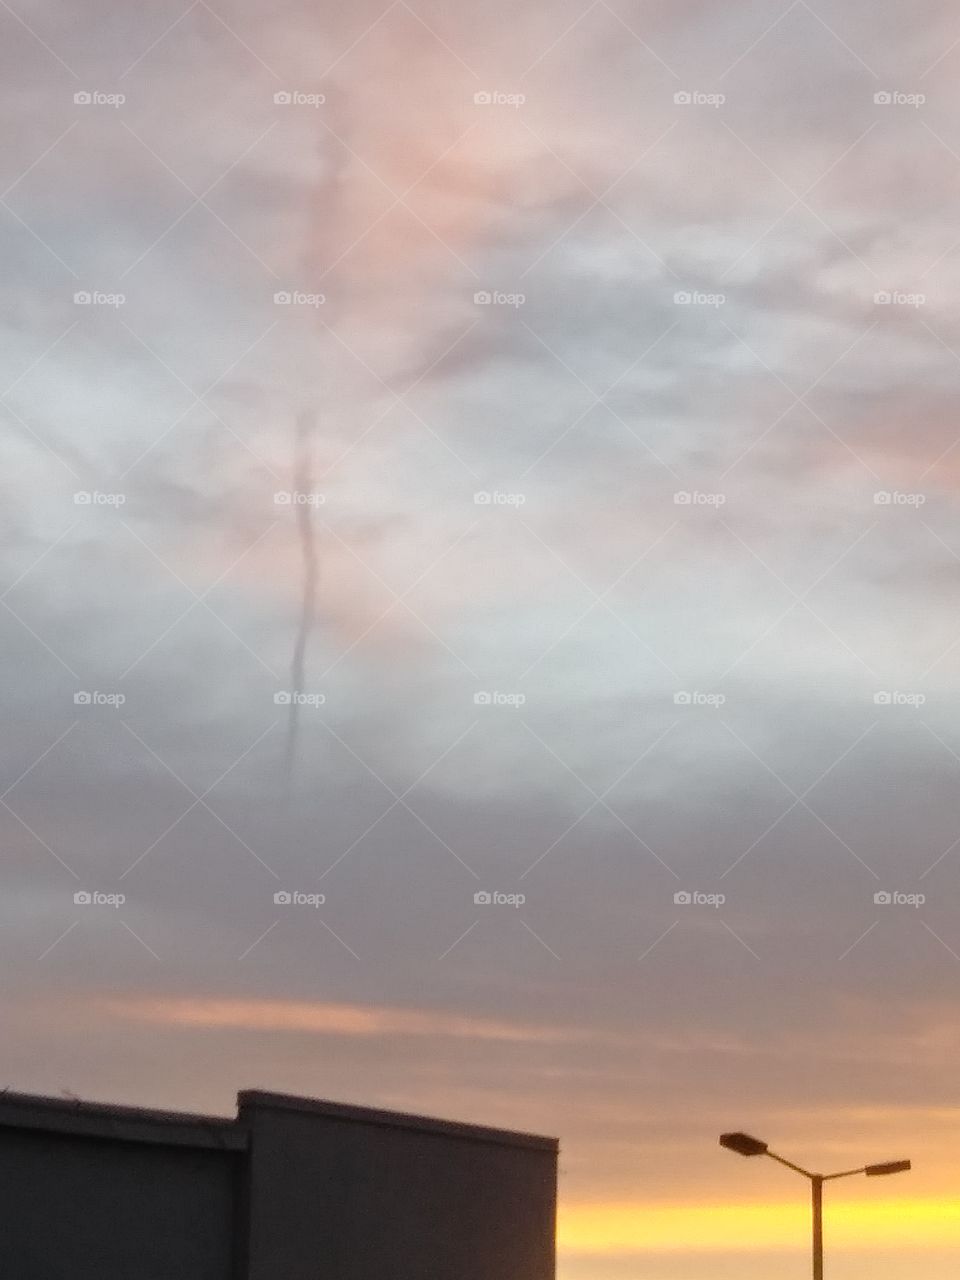 South Texas funnel in the sky